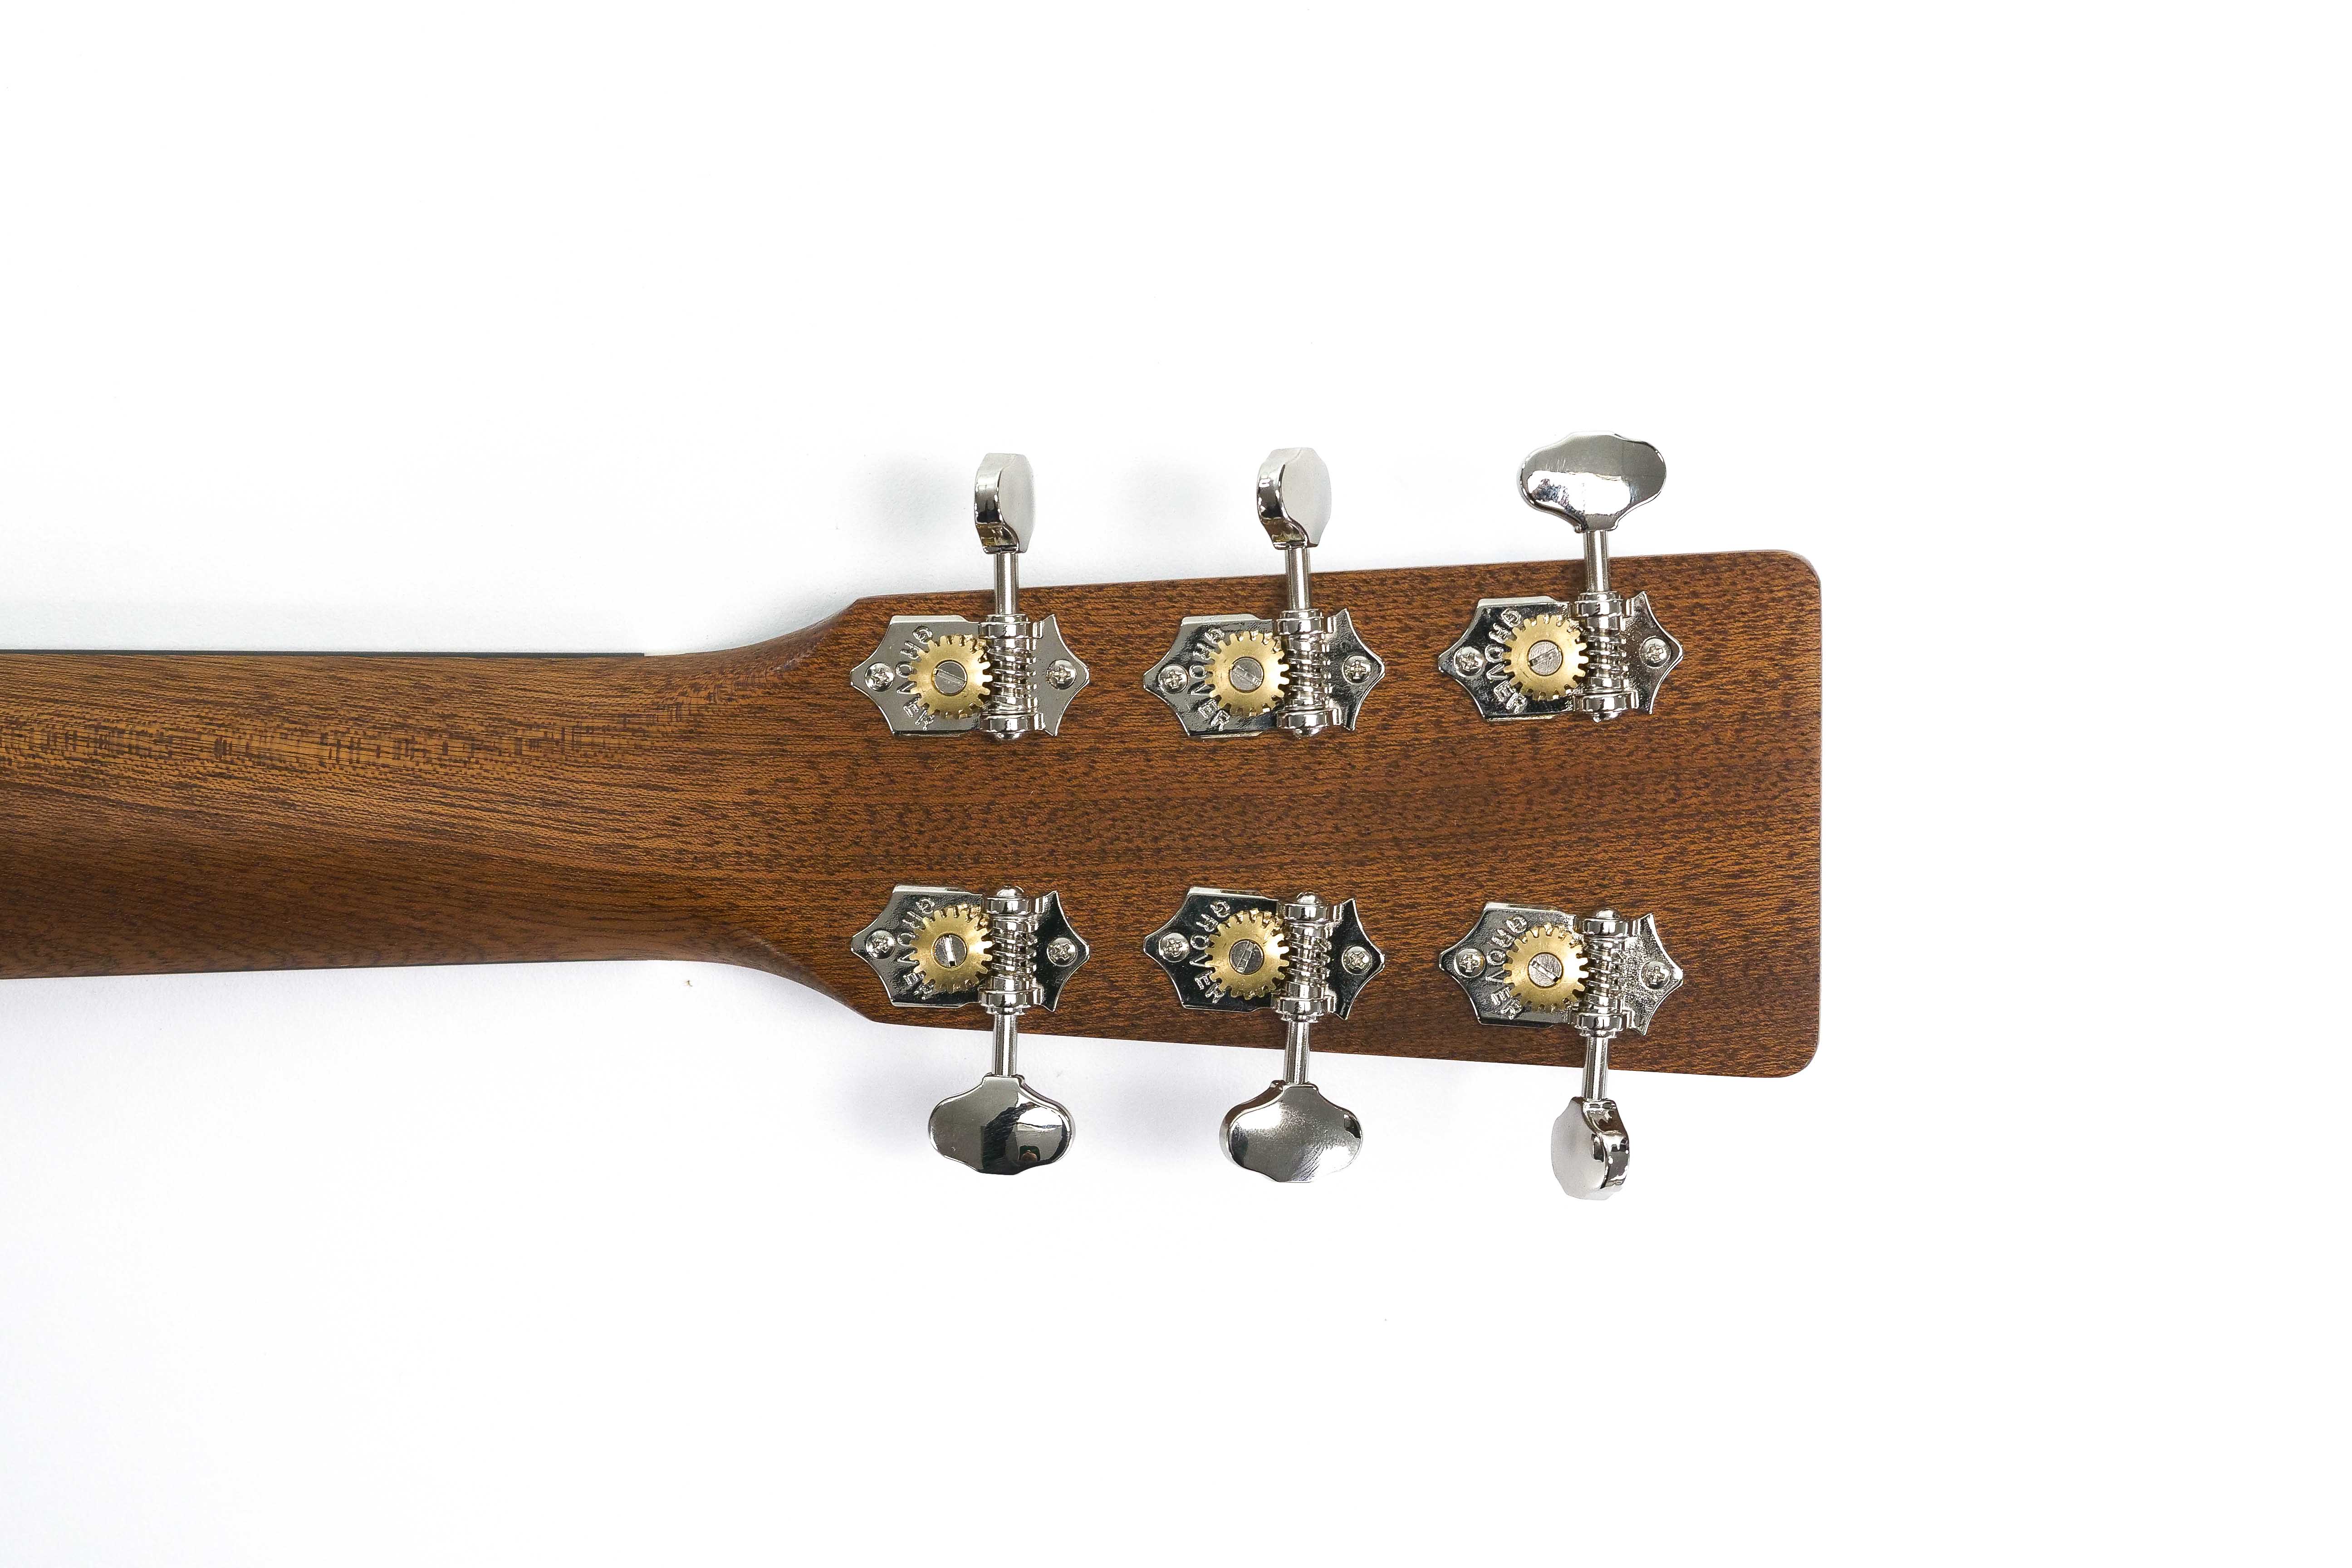 back of the headstock